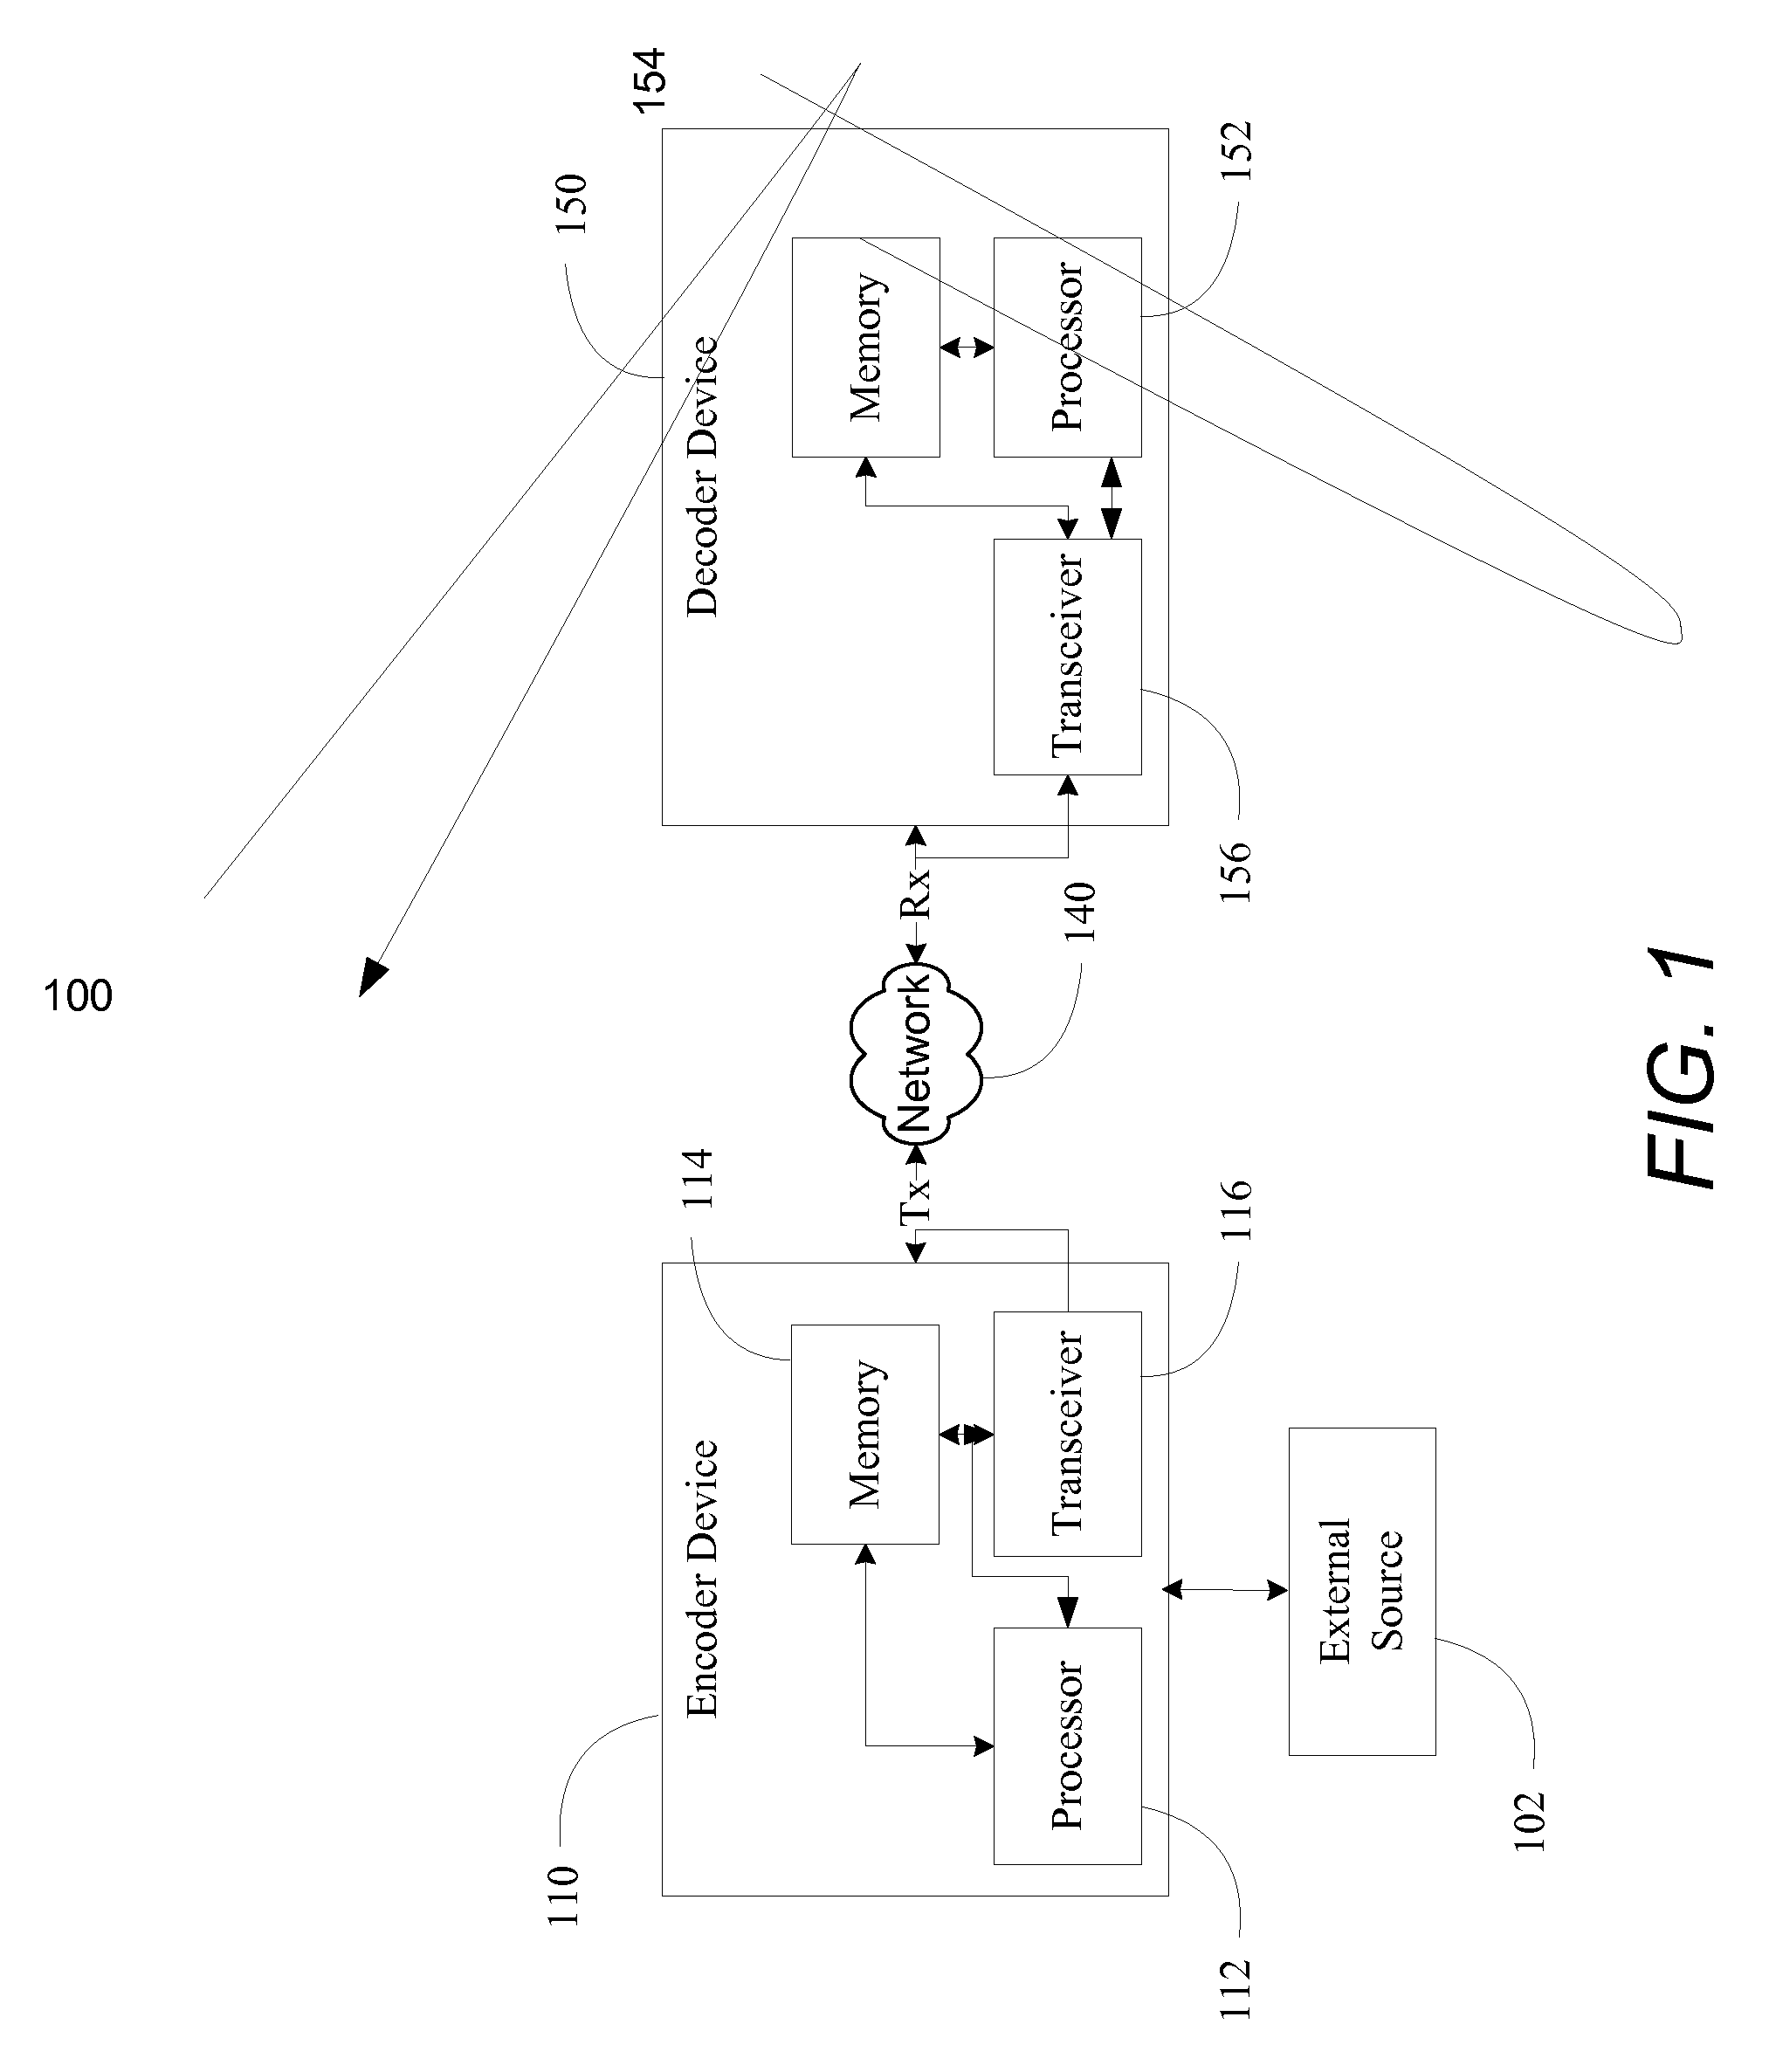 Method and apparatus for determining an encoding method based on a distortion value related to error concealment